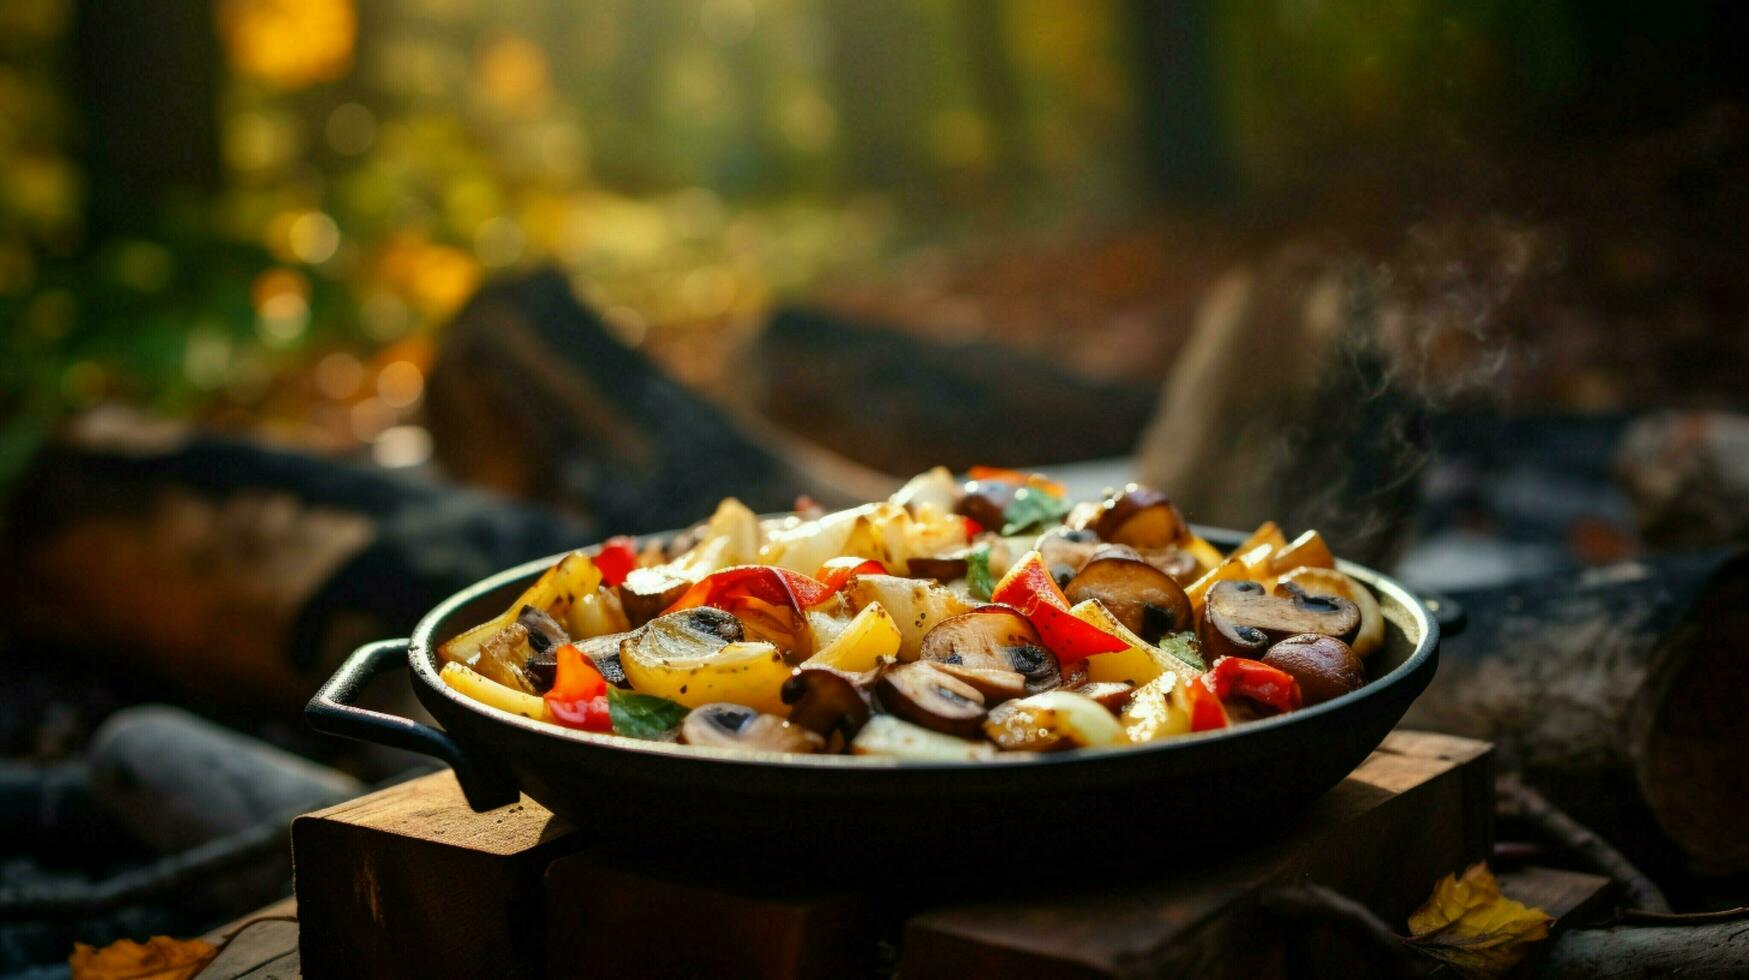 healthy vegetarian meal cooked outdoors on wood flame photo